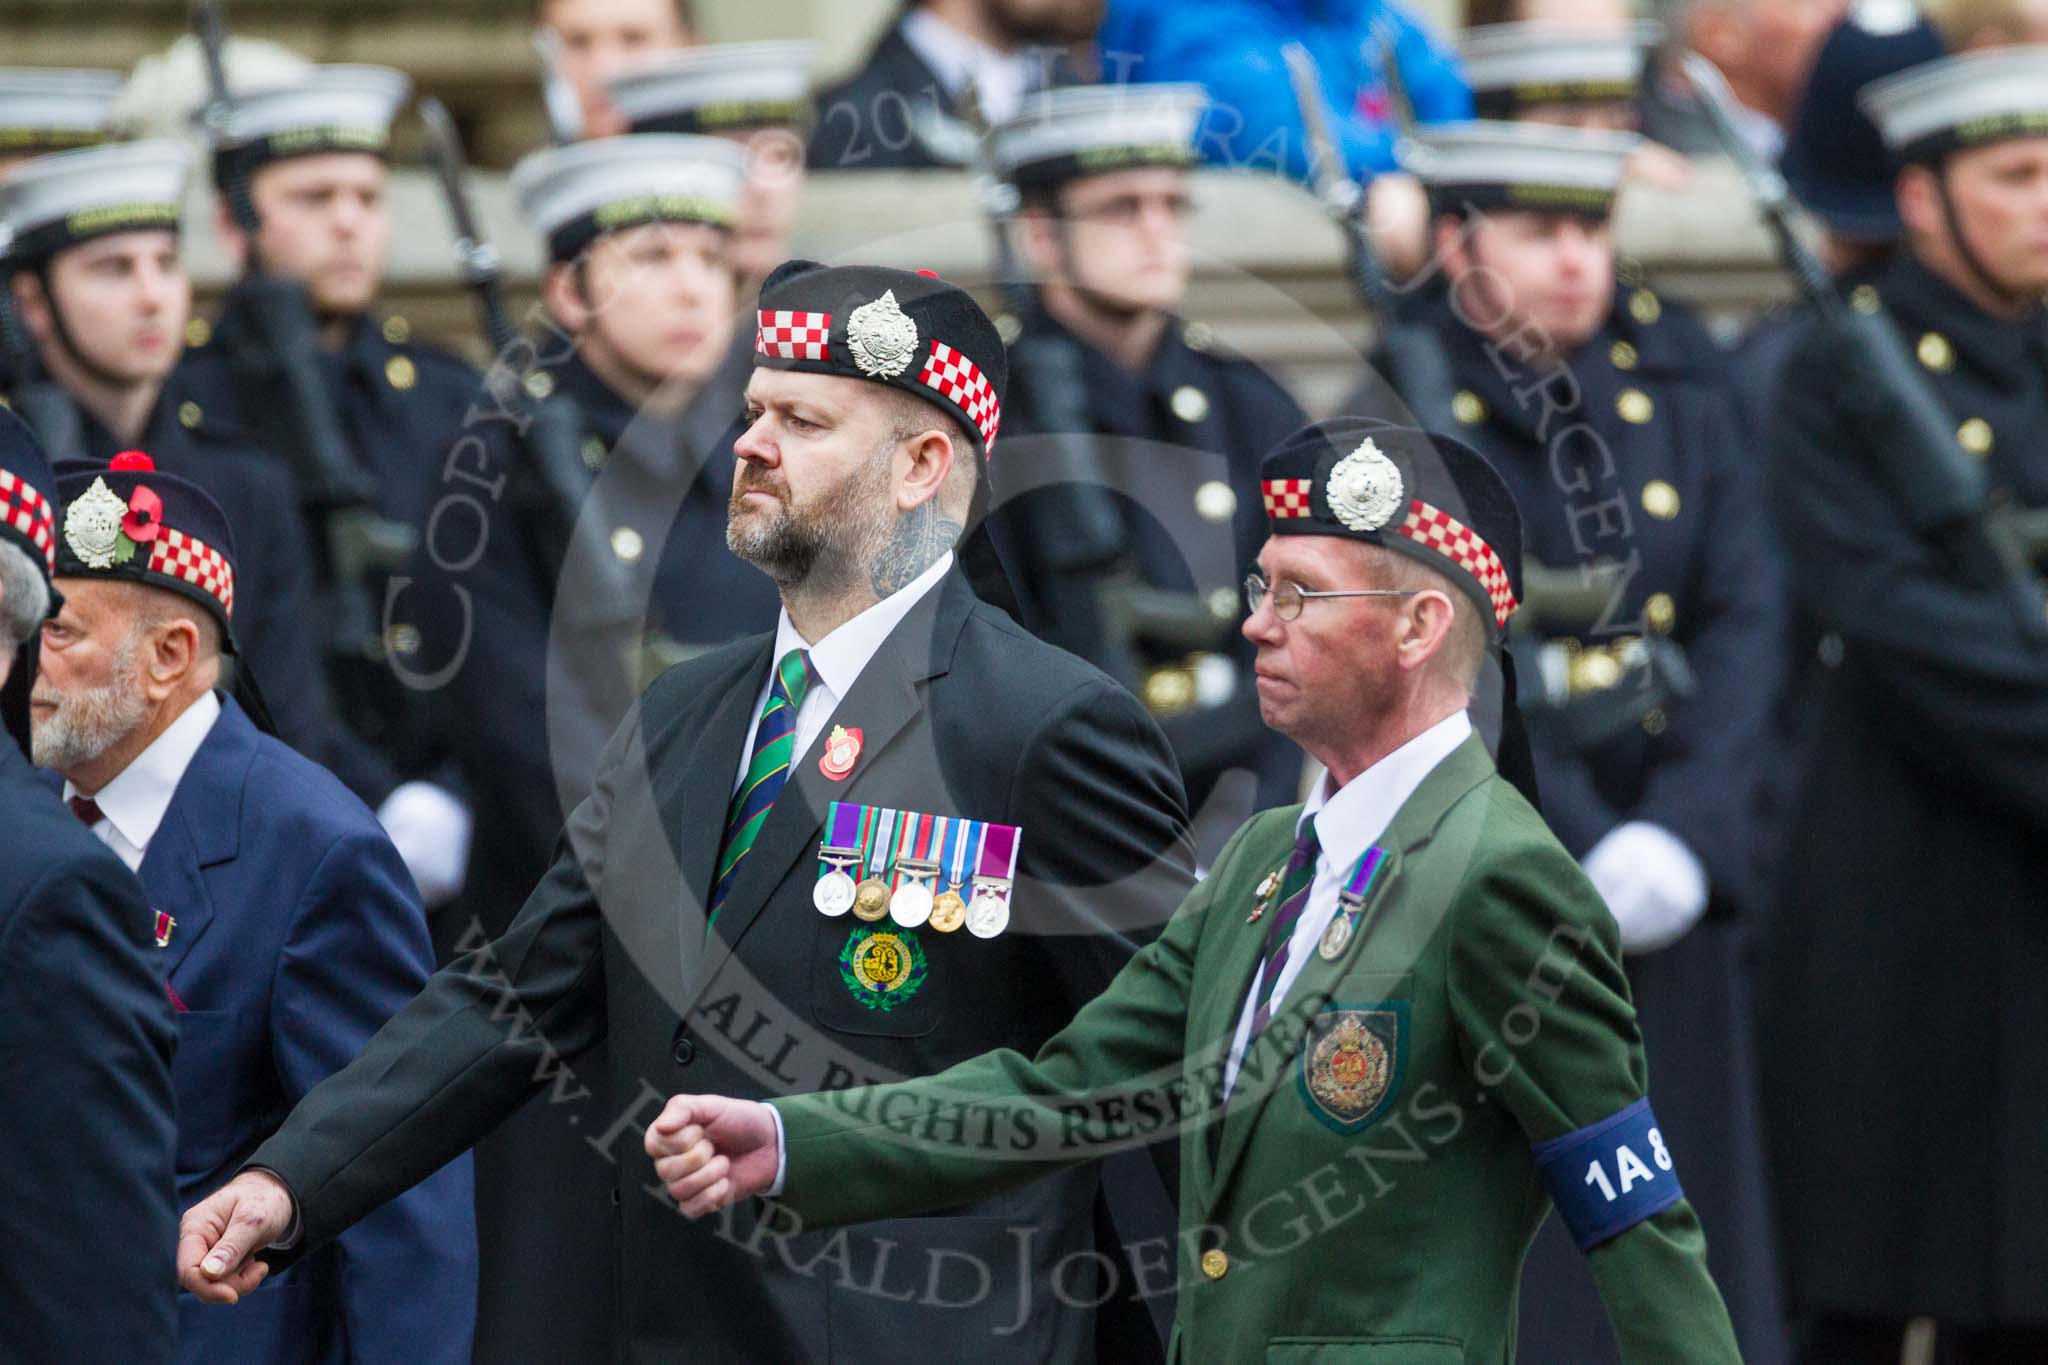 Remembrance Sunday at the Cenotaph 2015: Group A7, Argyll & Sutherland Highlanders Regimental Association.
Cenotaph, Whitehall, London SW1,
London,
Greater London,
United Kingdom,
on 08 November 2015 at 12:10, image #1226